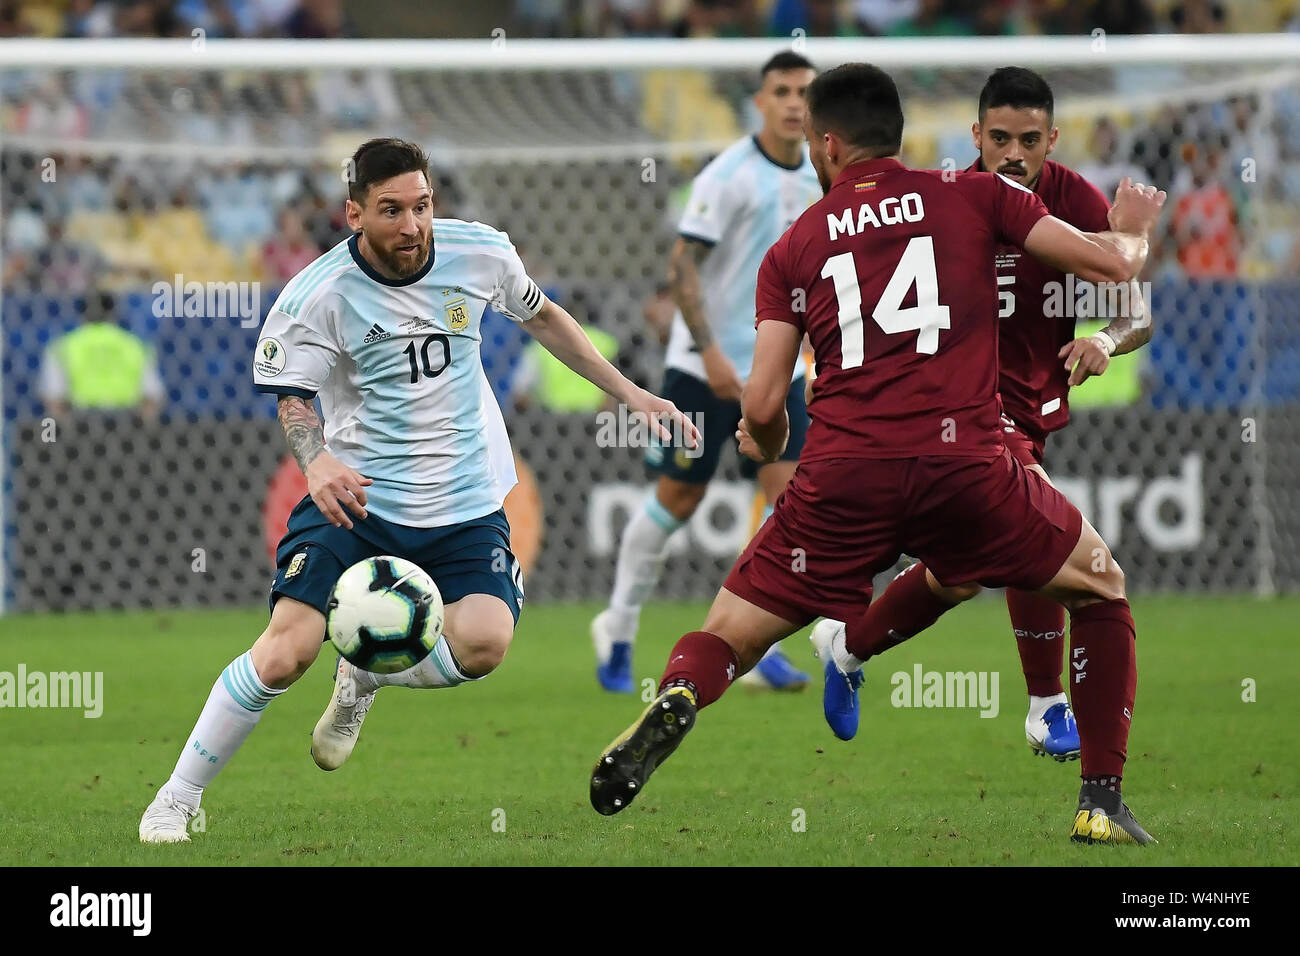 Soccer player Lionel Messi of Argentina, during the Venezuela vs Argentina  match for the Copa America 2019 at the Maracanã stadium Stock Photo - Alamy